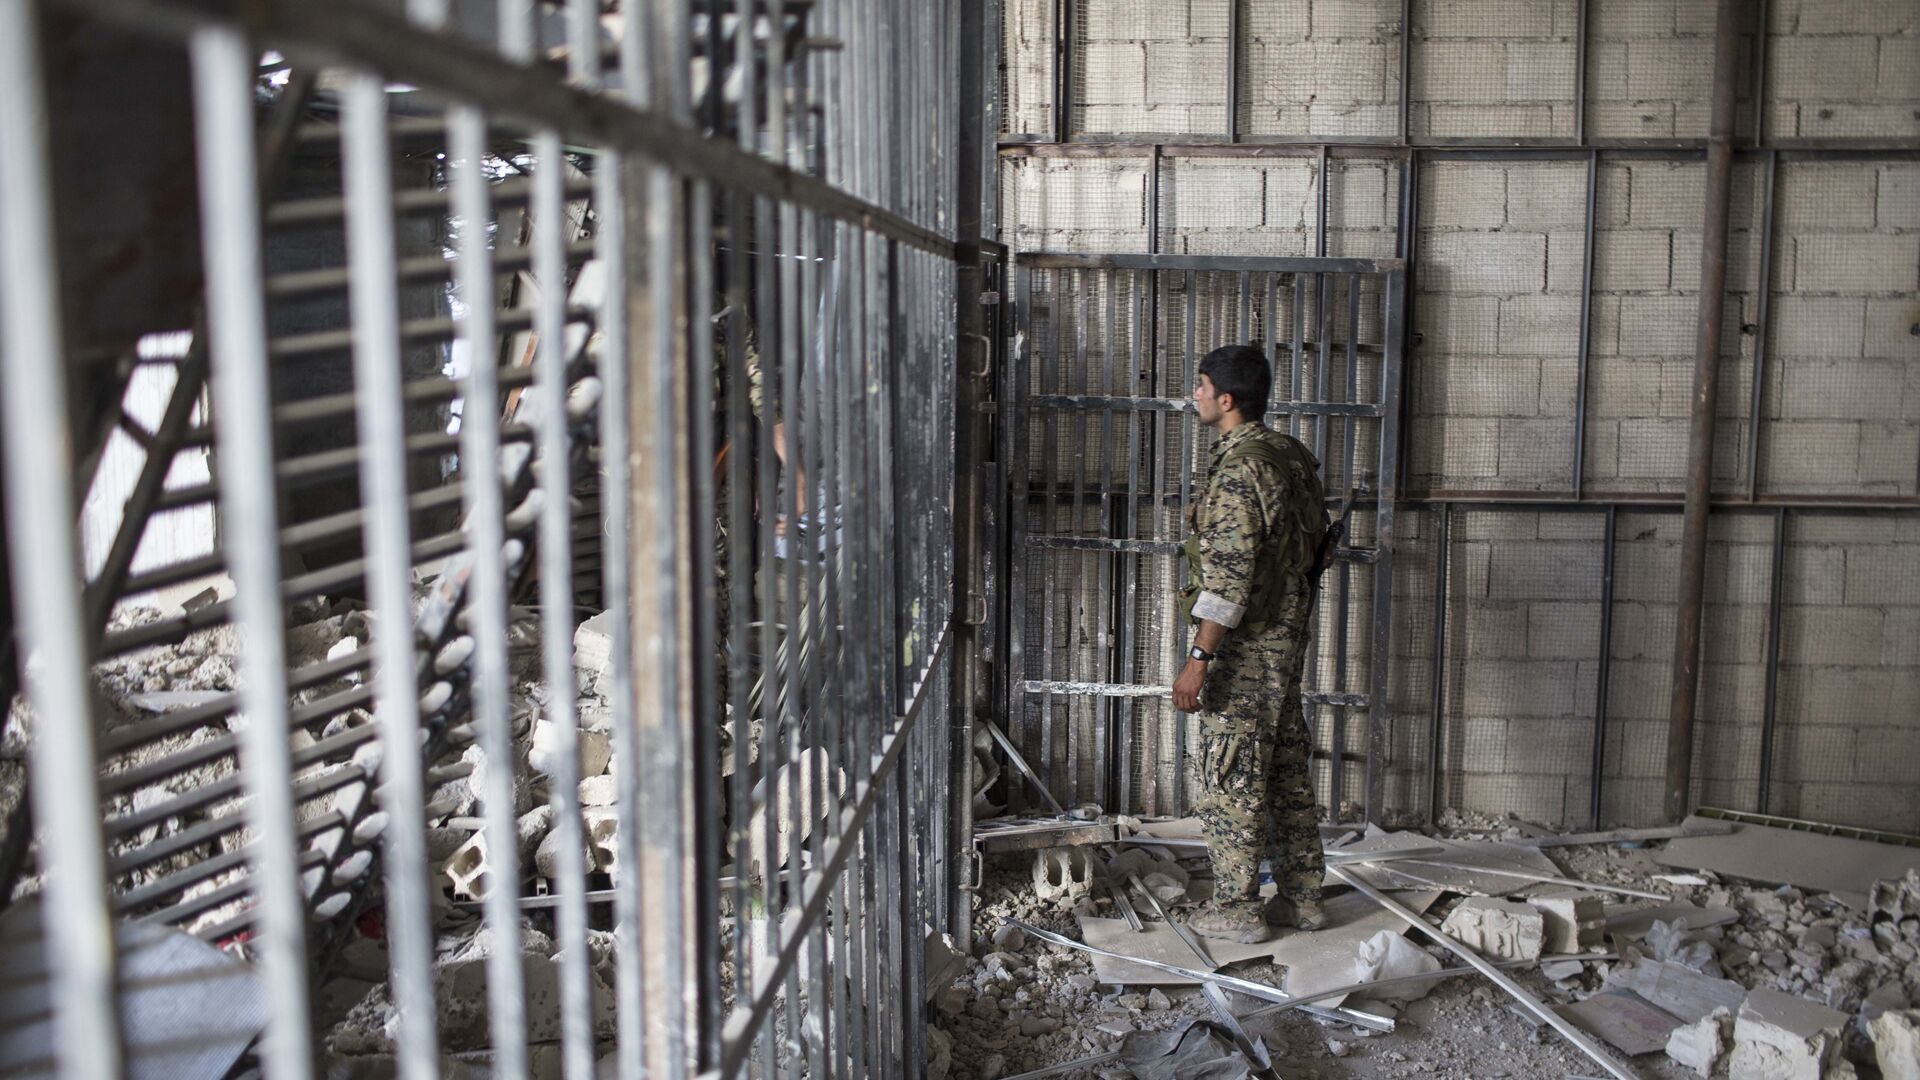 A member of the U.S.-backed Syrian Democratic Forces (SDF) walks inside a prison built by Islamic State fighters at the stadium that was the site of Islamic State fighters' last stand in the city of Raqqa, Syria, Friday, Oct. 20, 2017 - Sputnik International, 1920, 19.06.2022